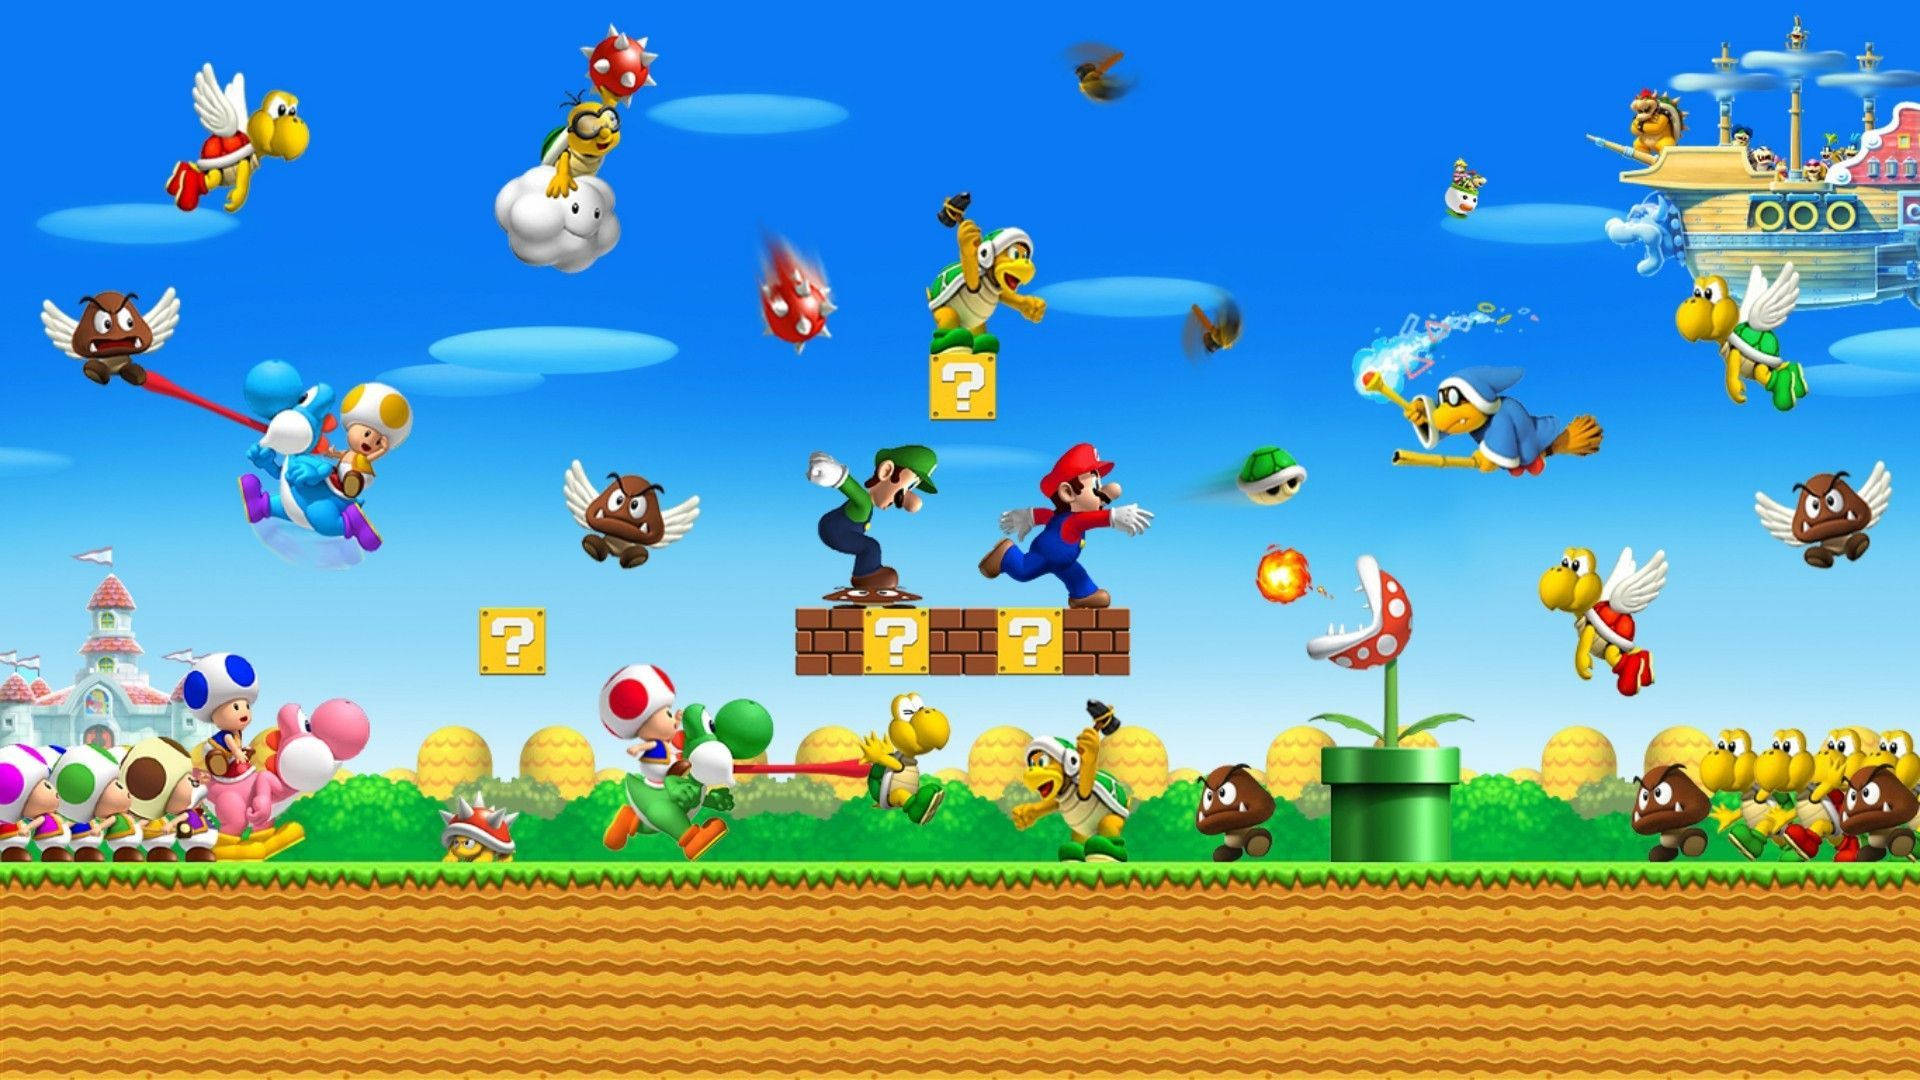 Get ready to explore a world of adventure with Nintendo's Super Mario! Wallpaper